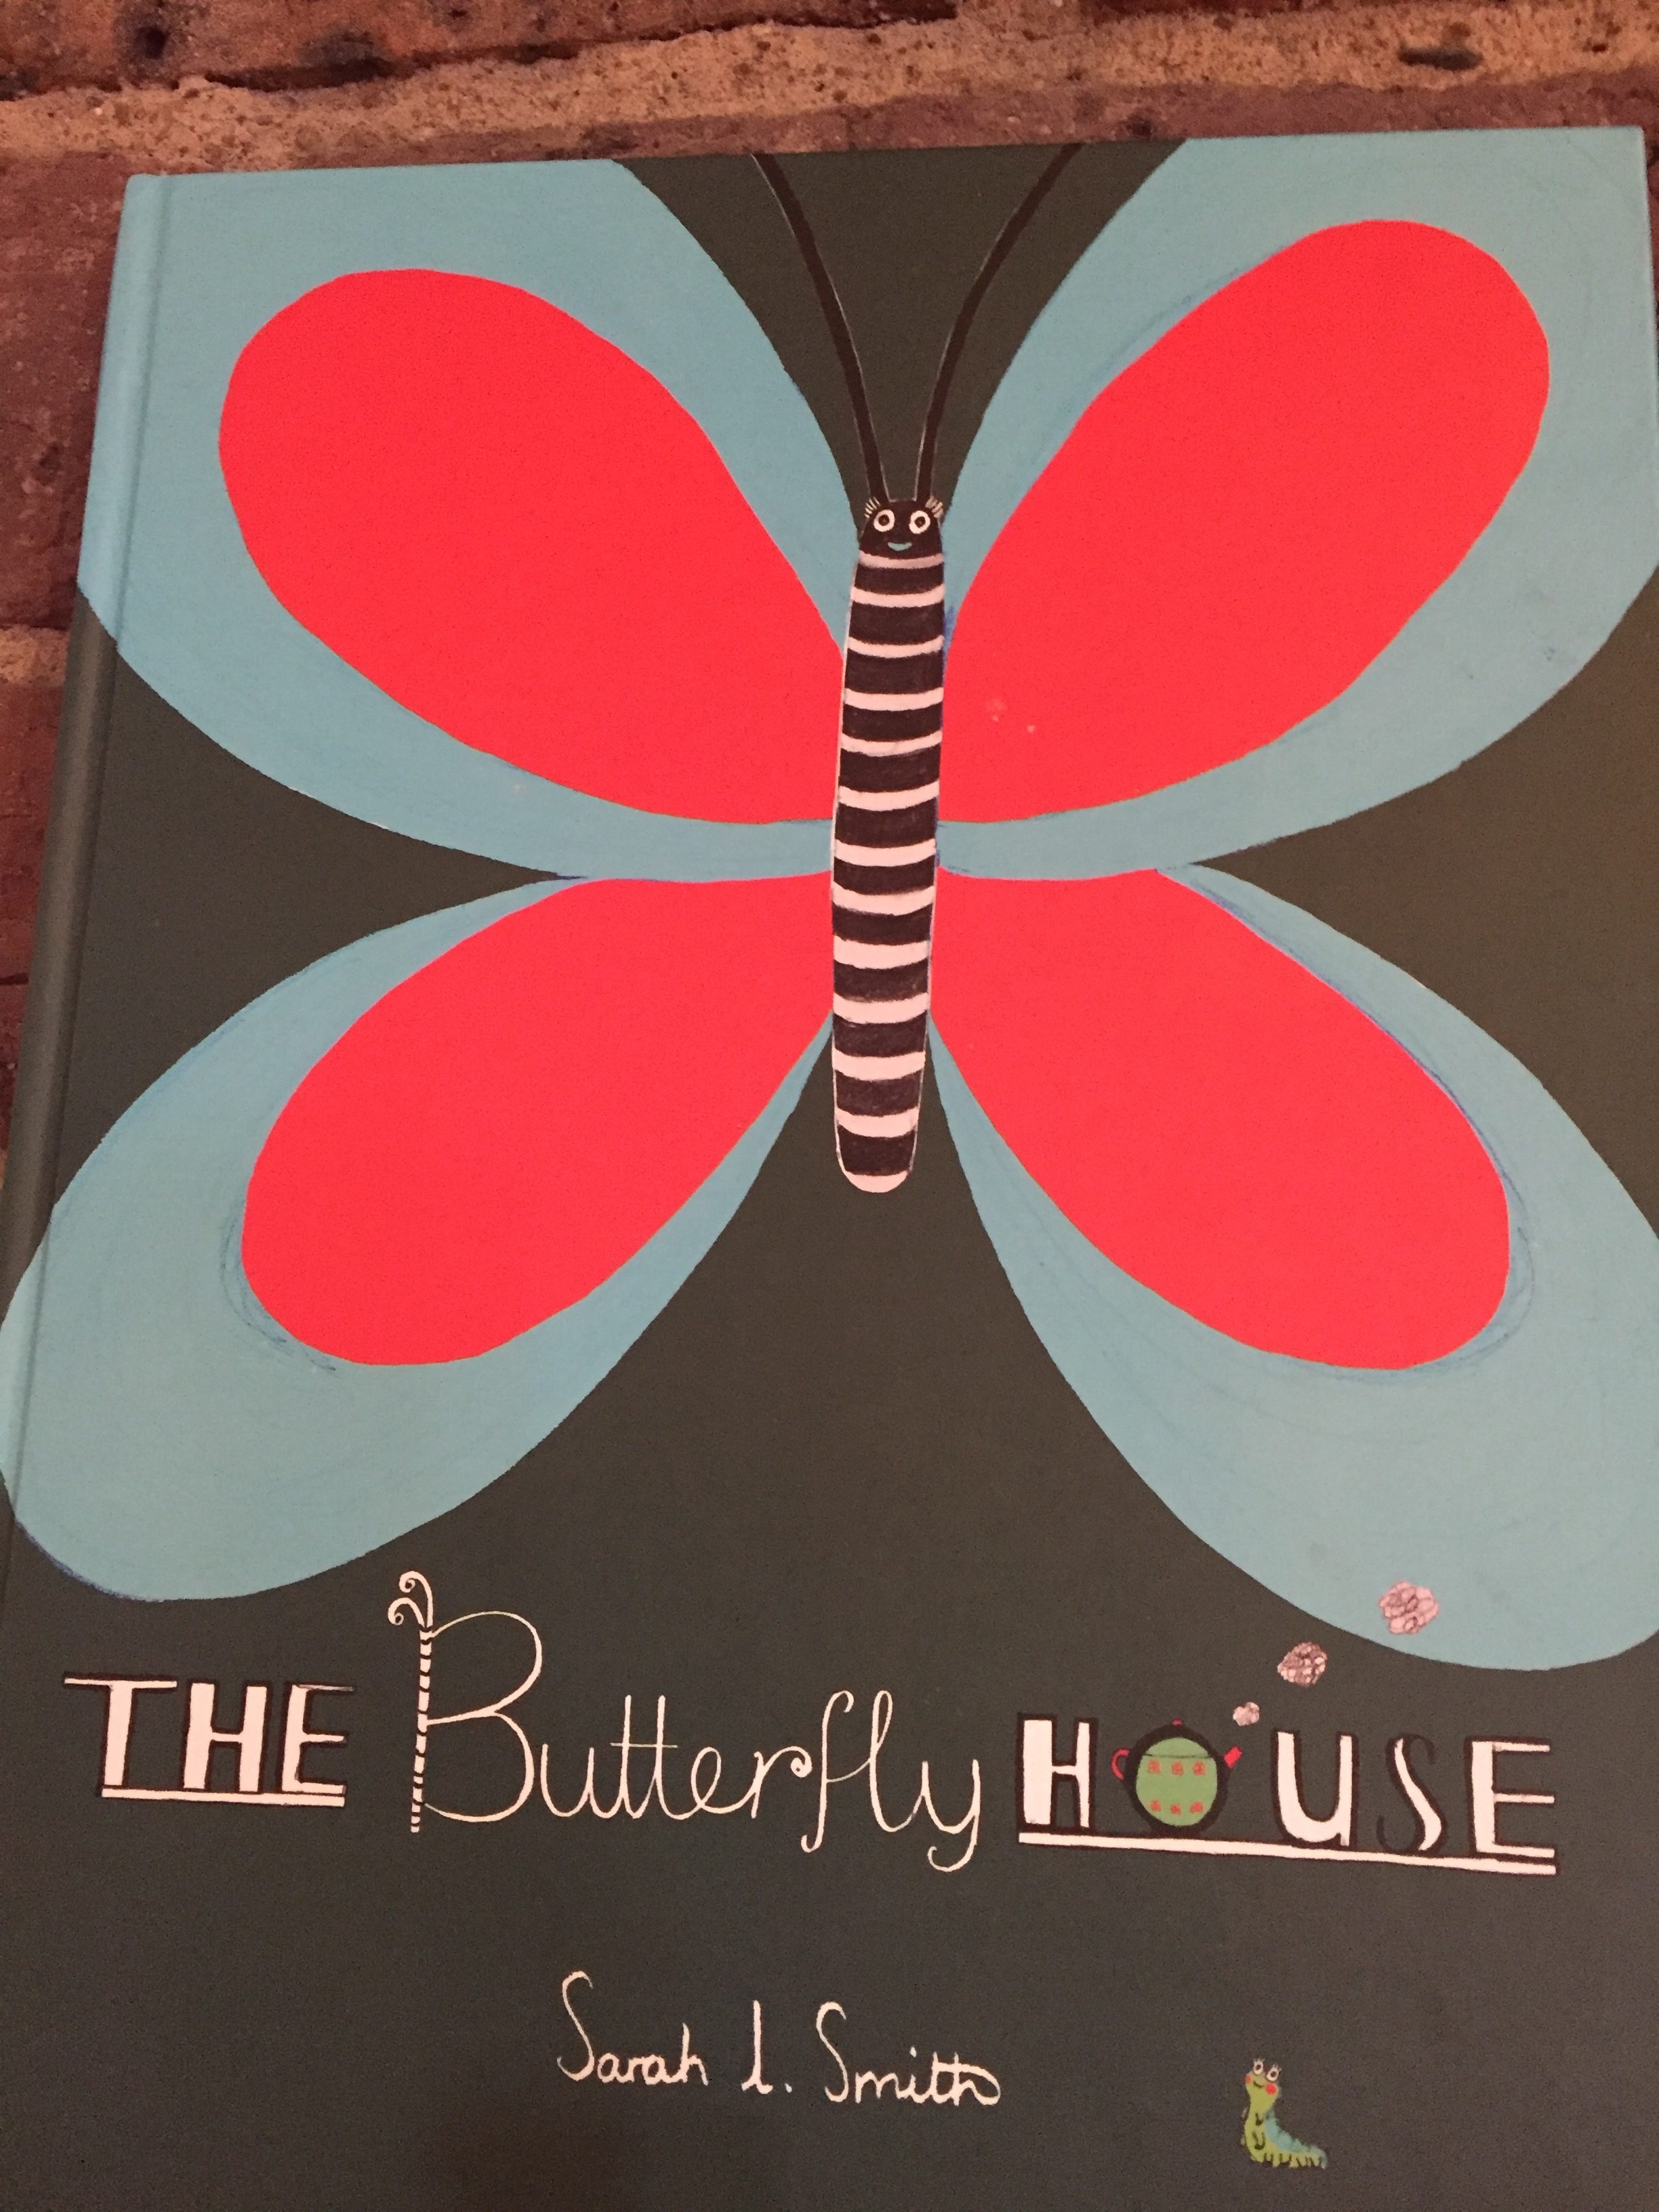 The butterfly house